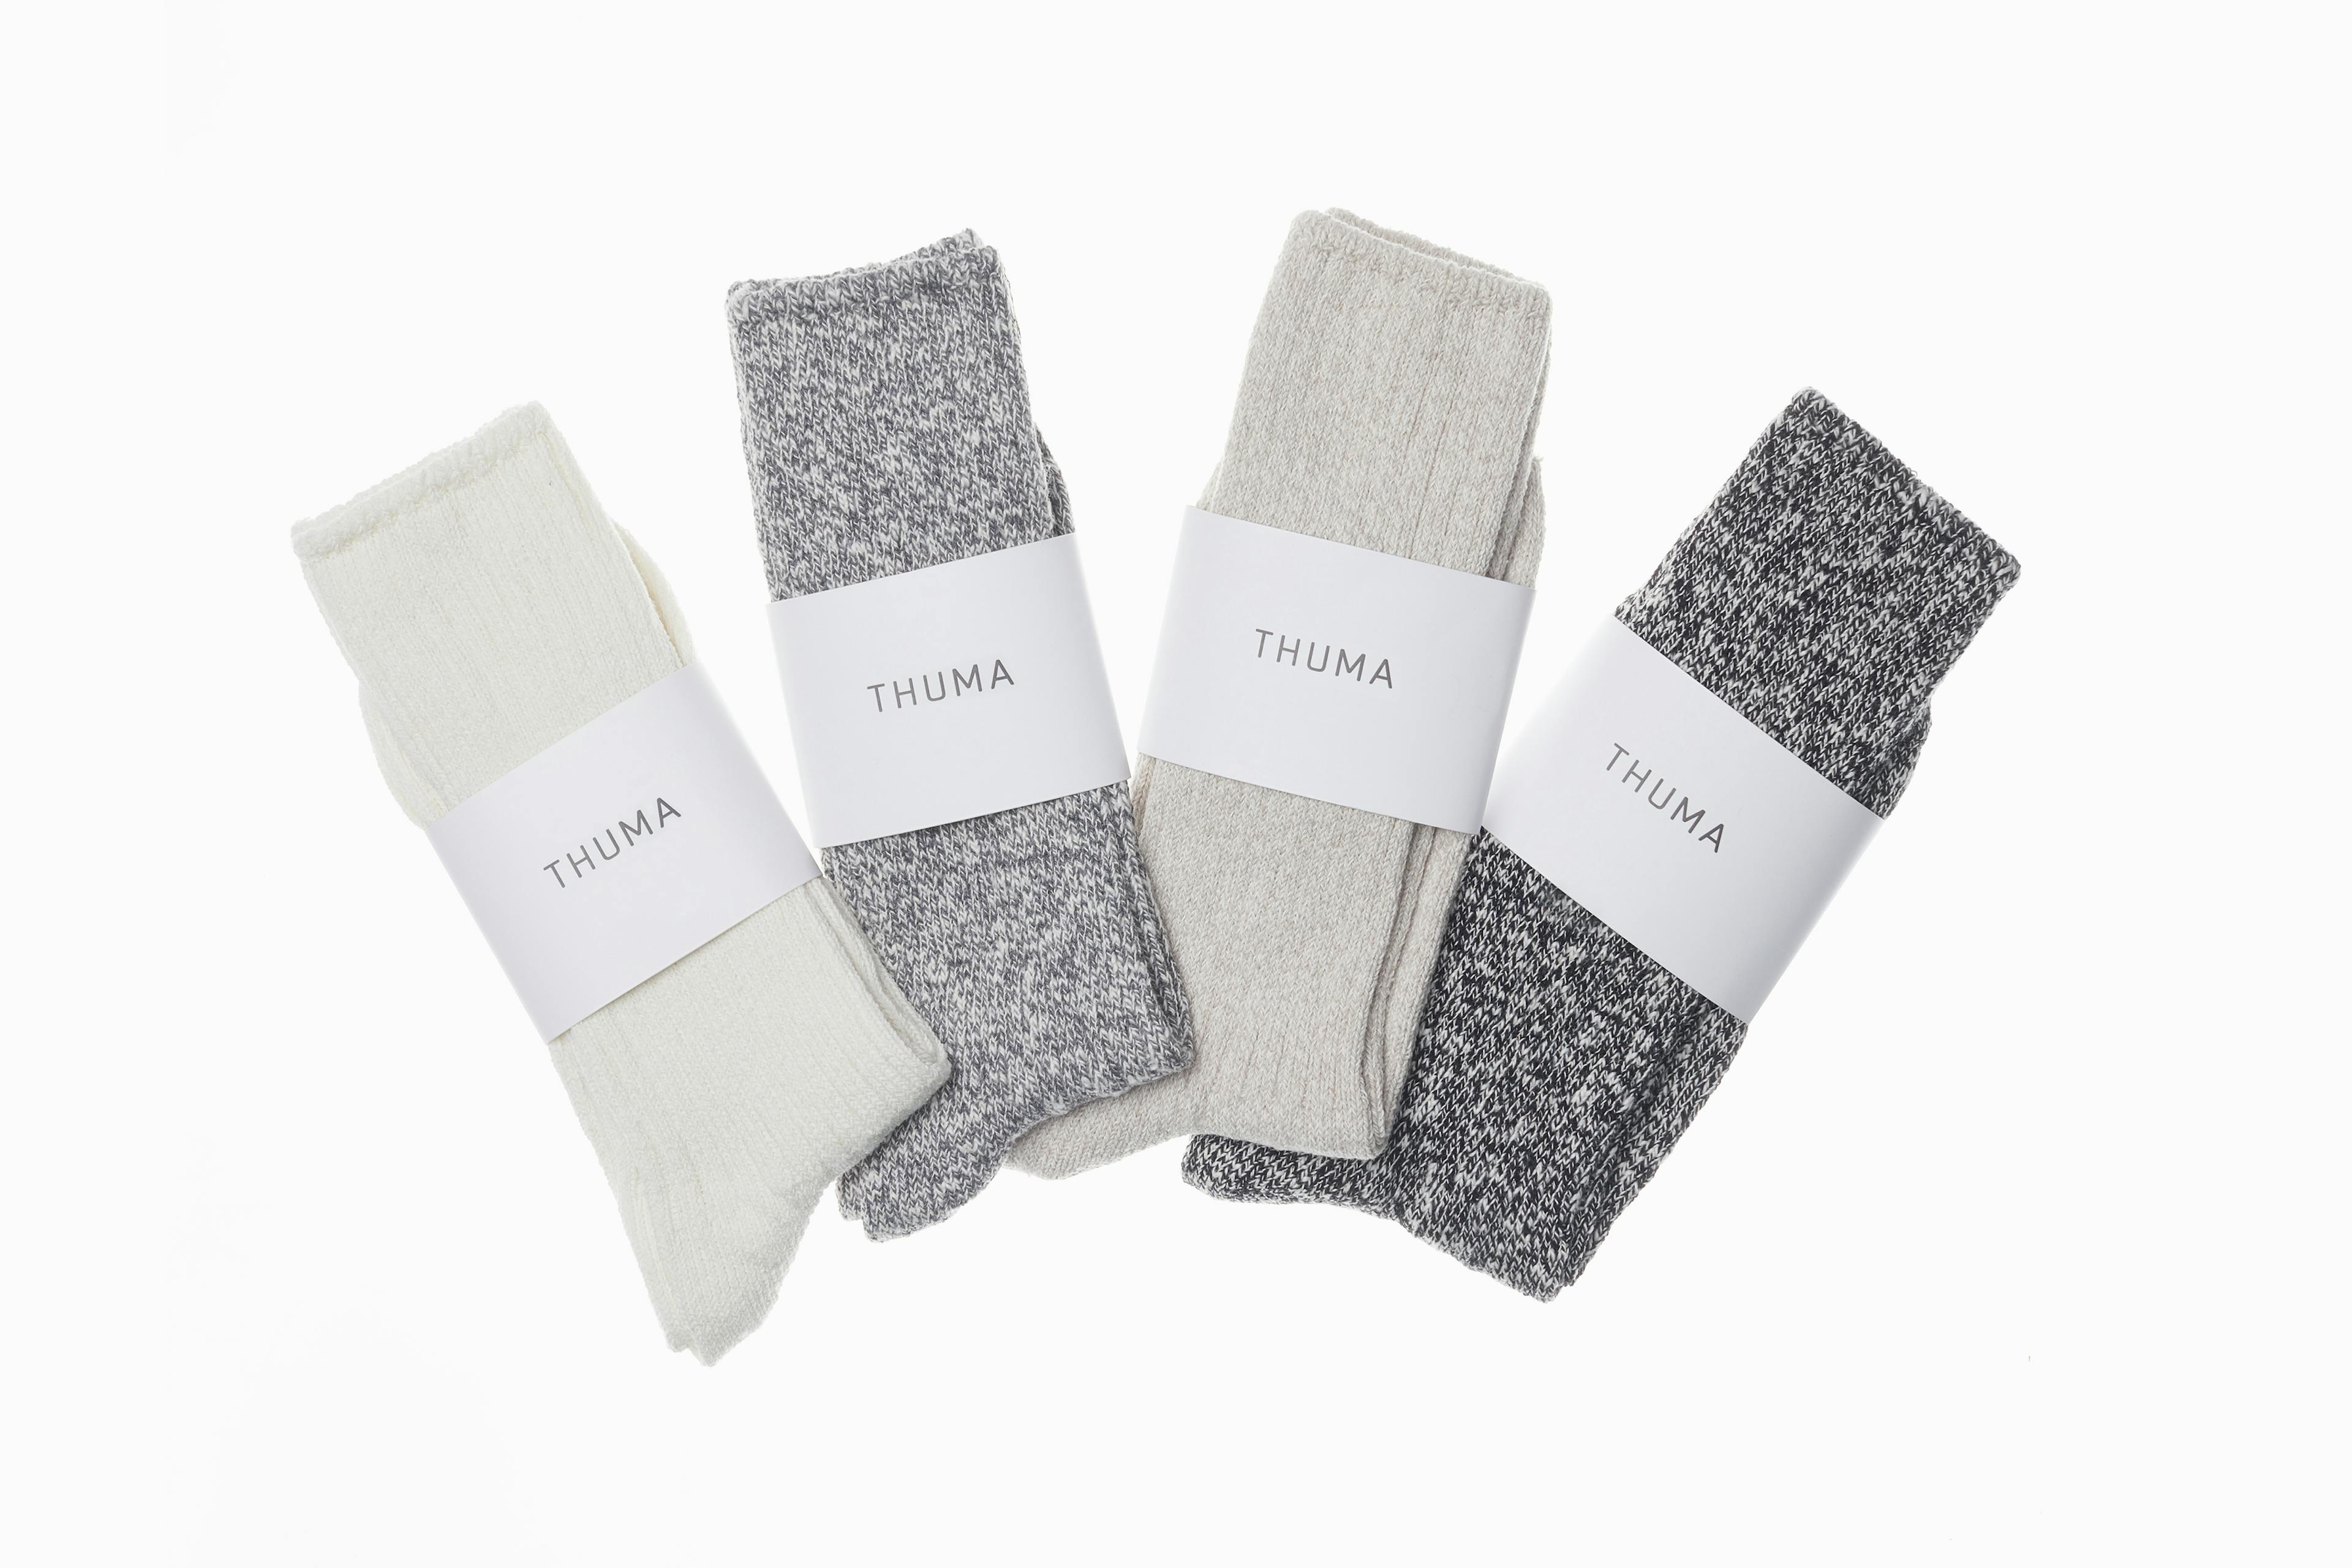 Lounge & Leisure Socks (Heathered Grey) - Spread Out - 3:2